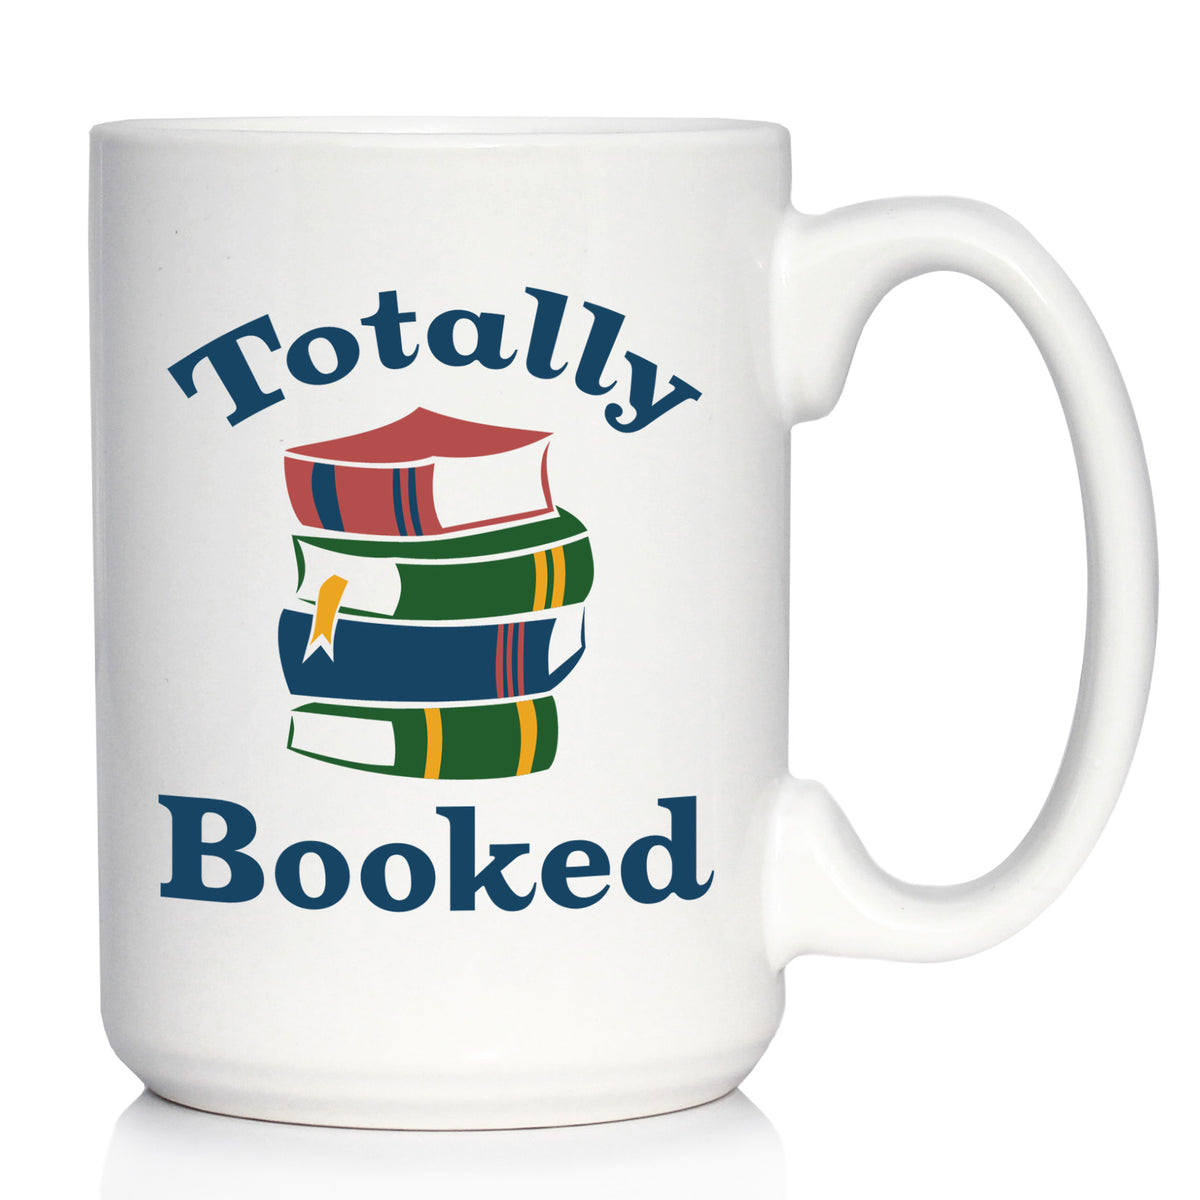 Totally Booked Coffee Mug - Funny Book Club Gifts for Lovers of Reading &amp; Fun Librarians